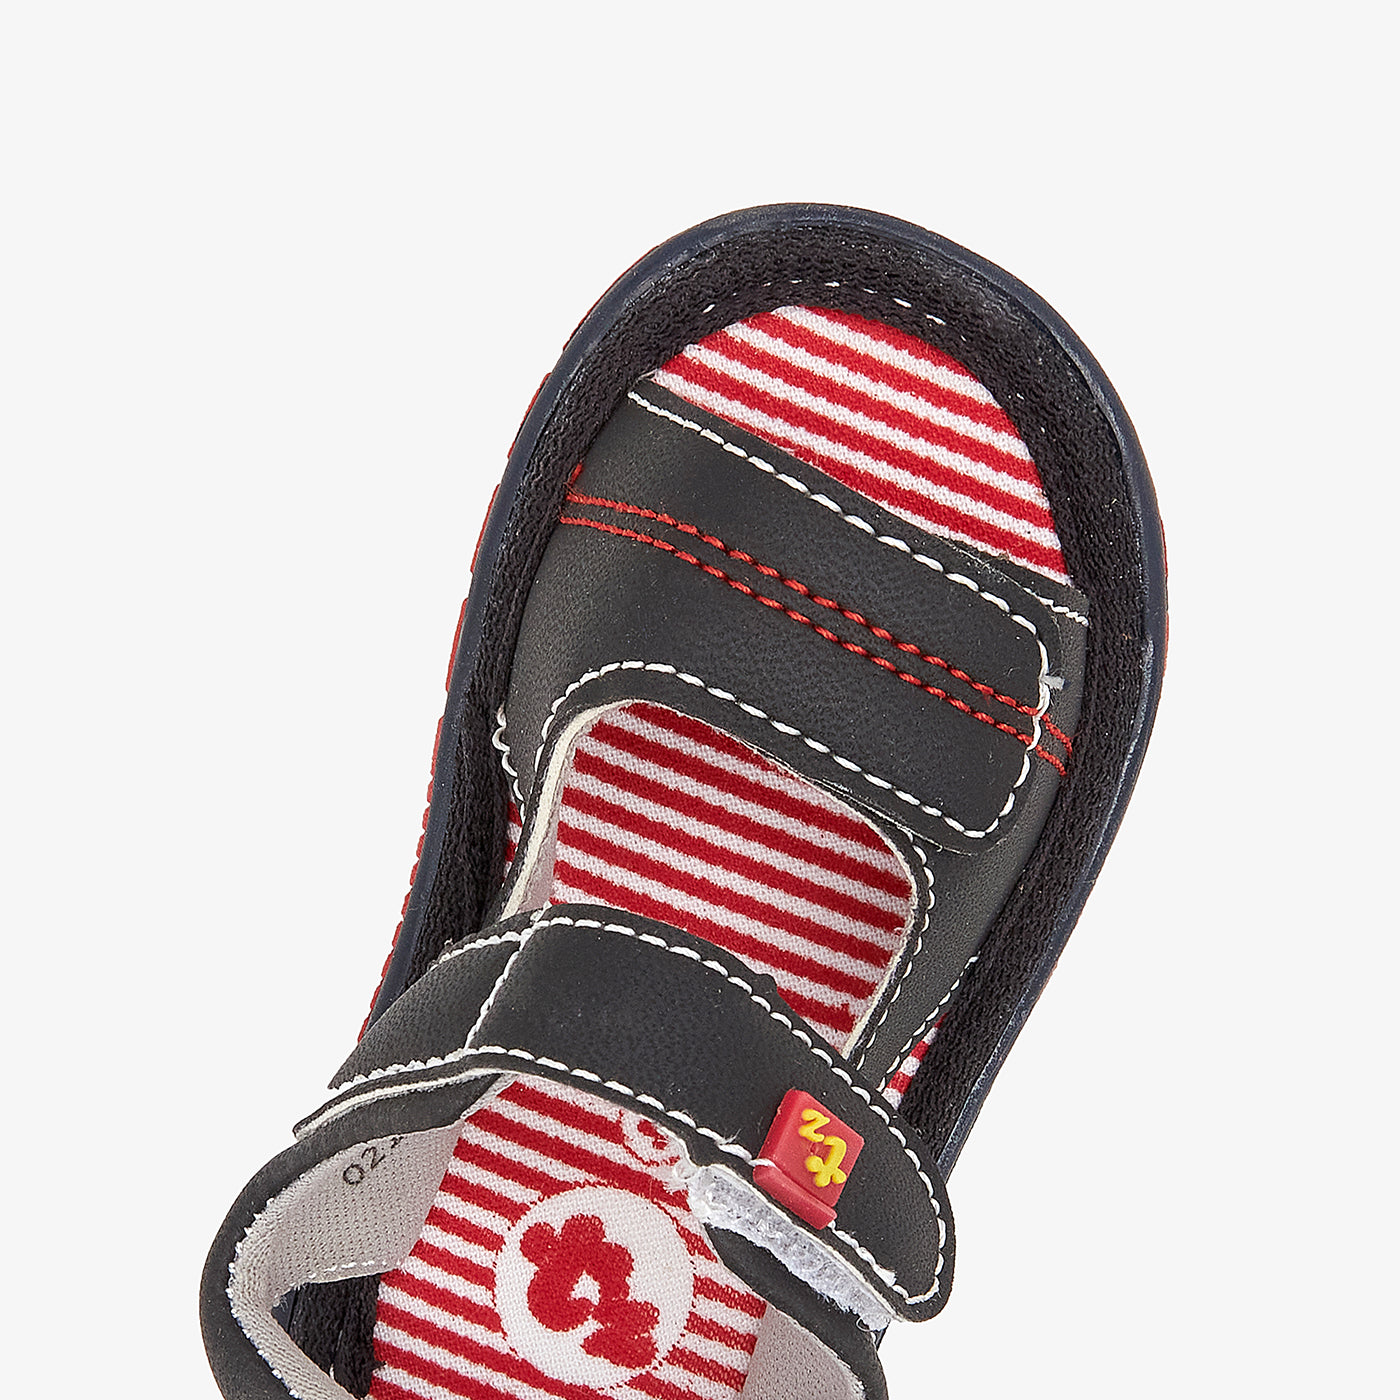 Fun Sandals for Kids